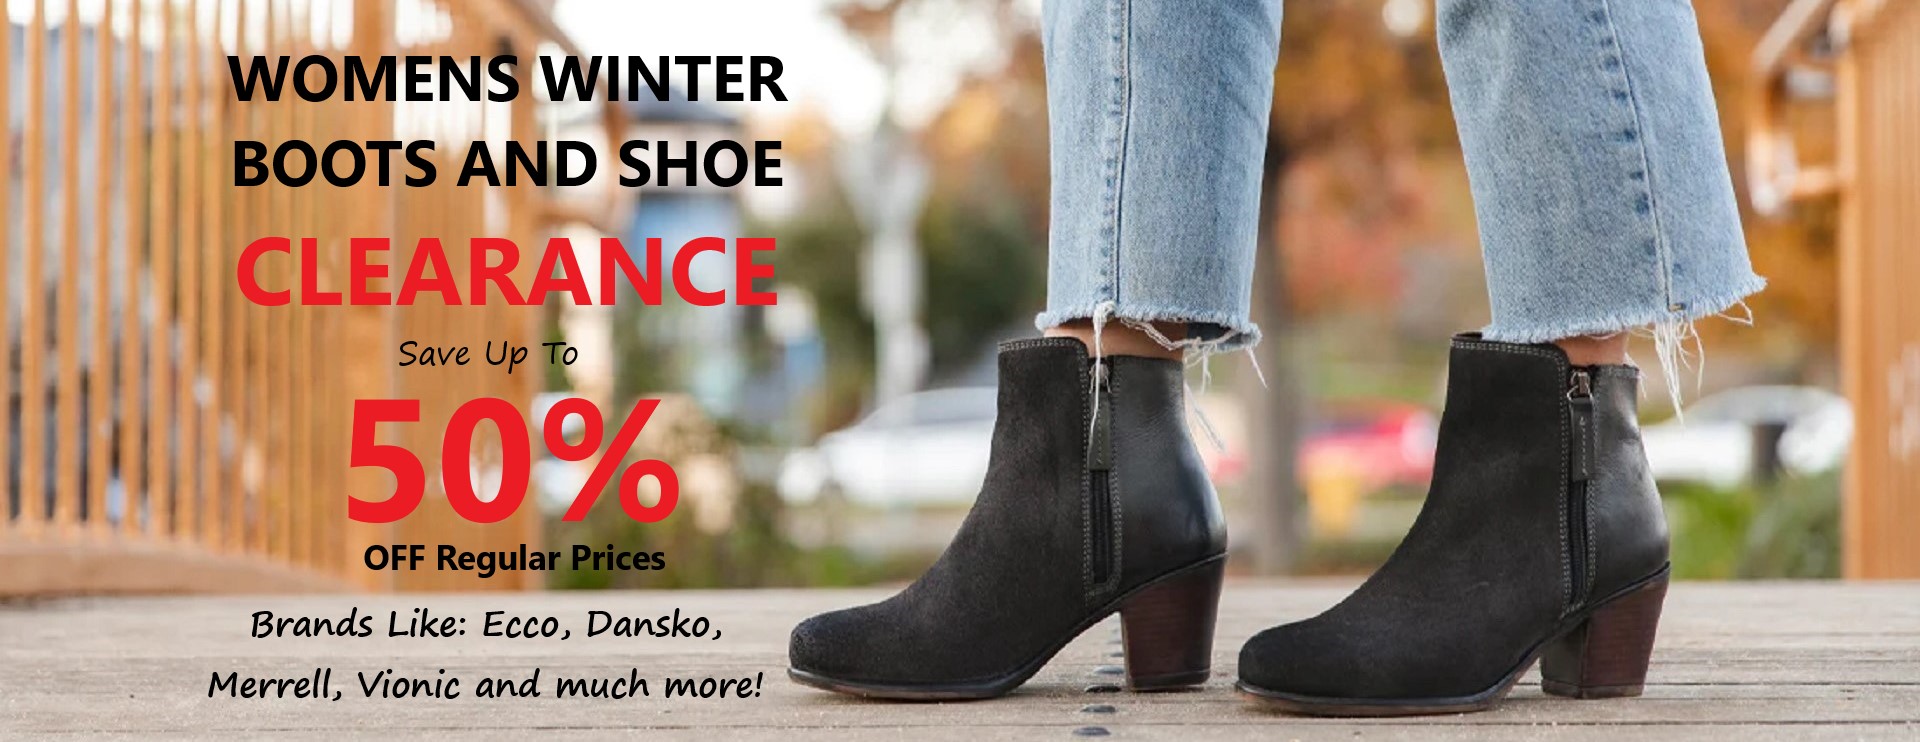 Fall Sale Boot Ad